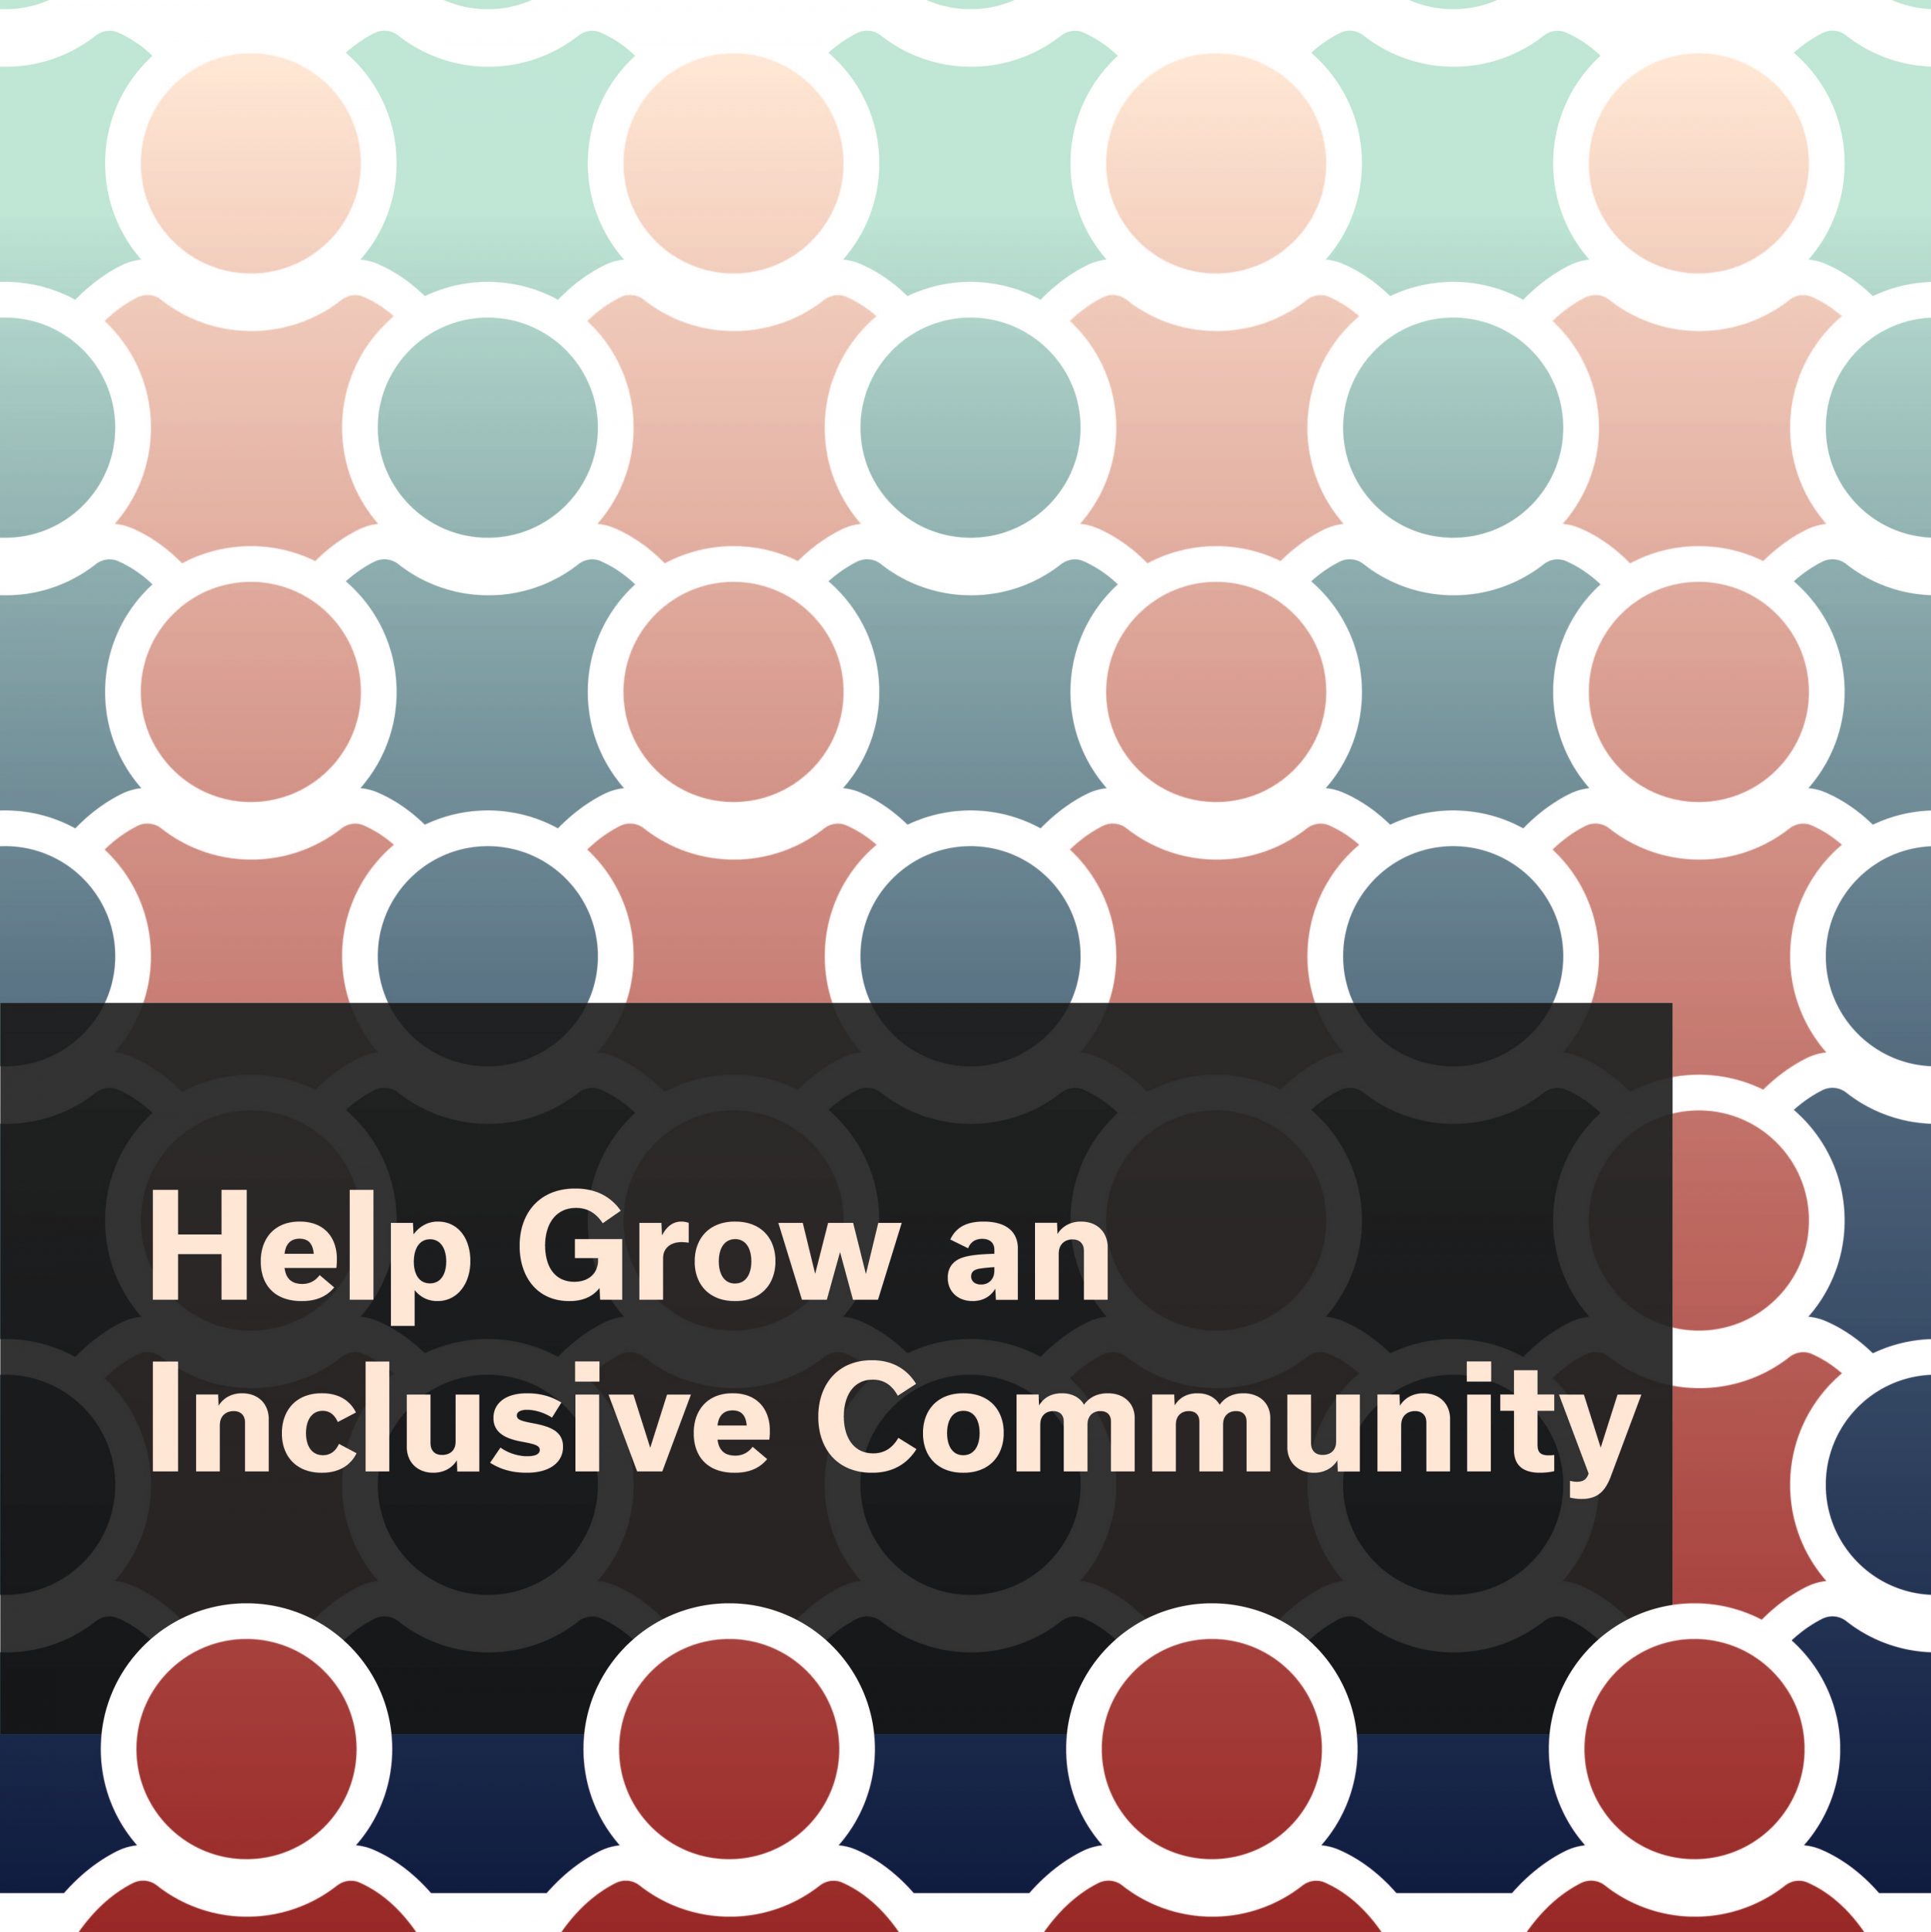 How to Grow an Inclusive Community